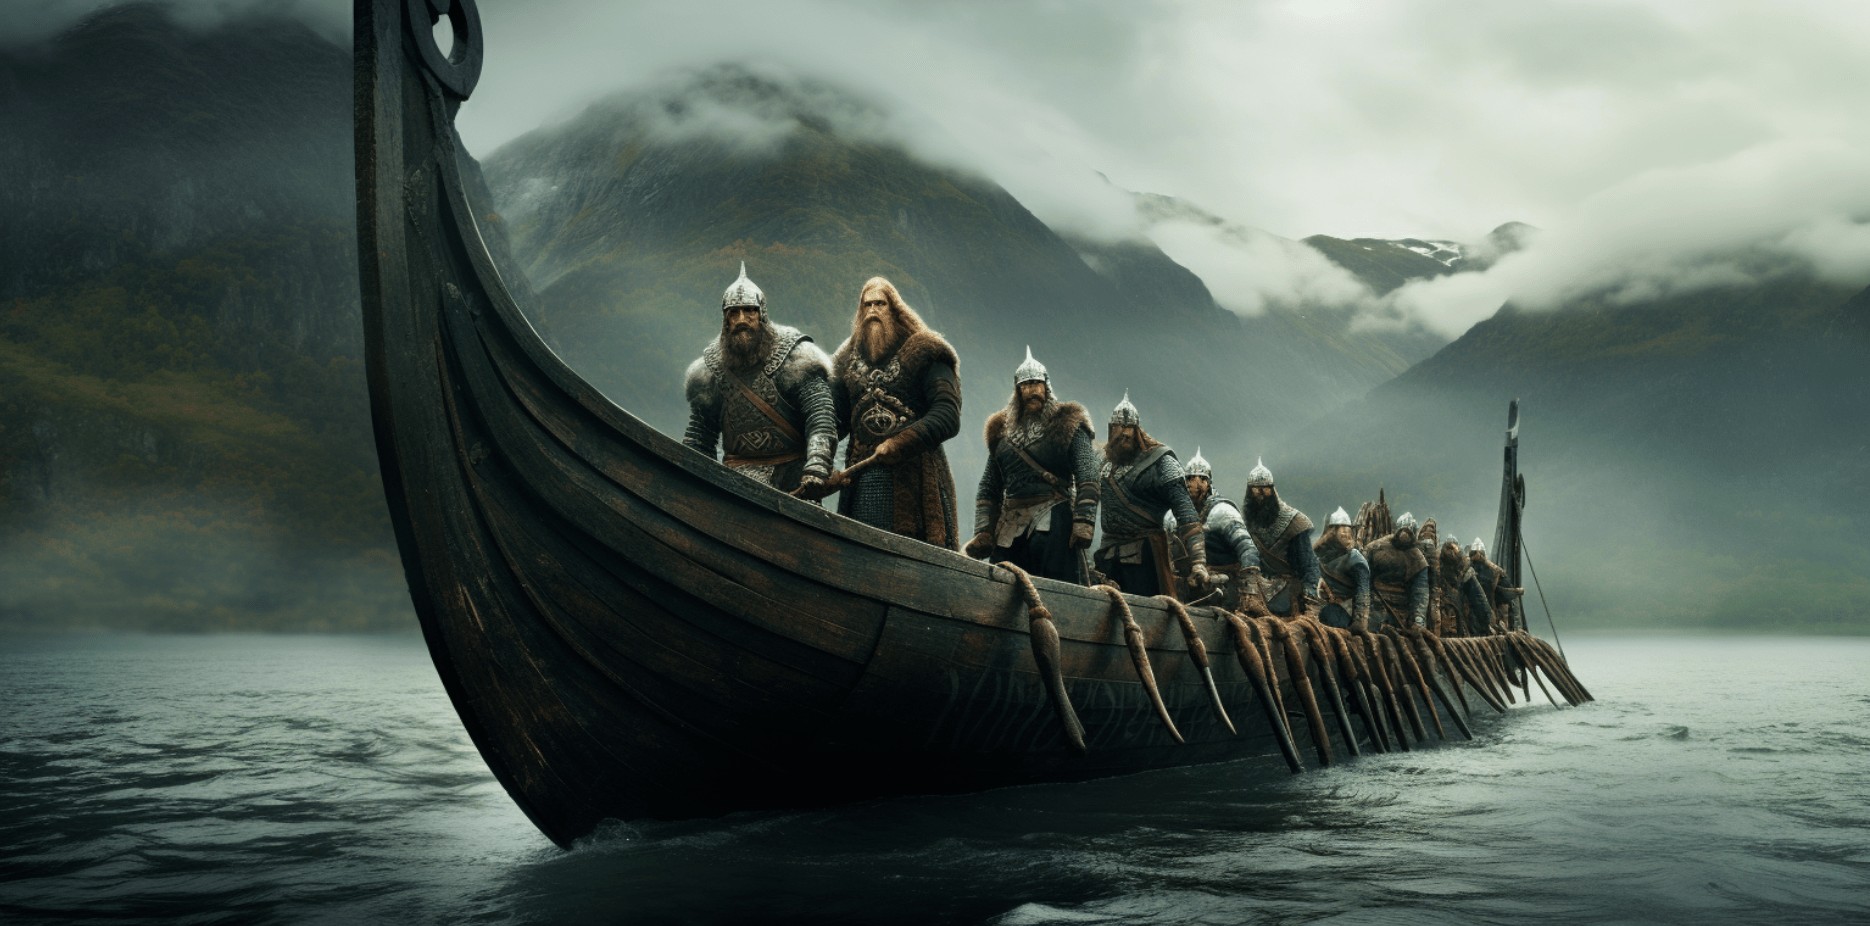 The Eighth Lost Tale: Canute the Viking